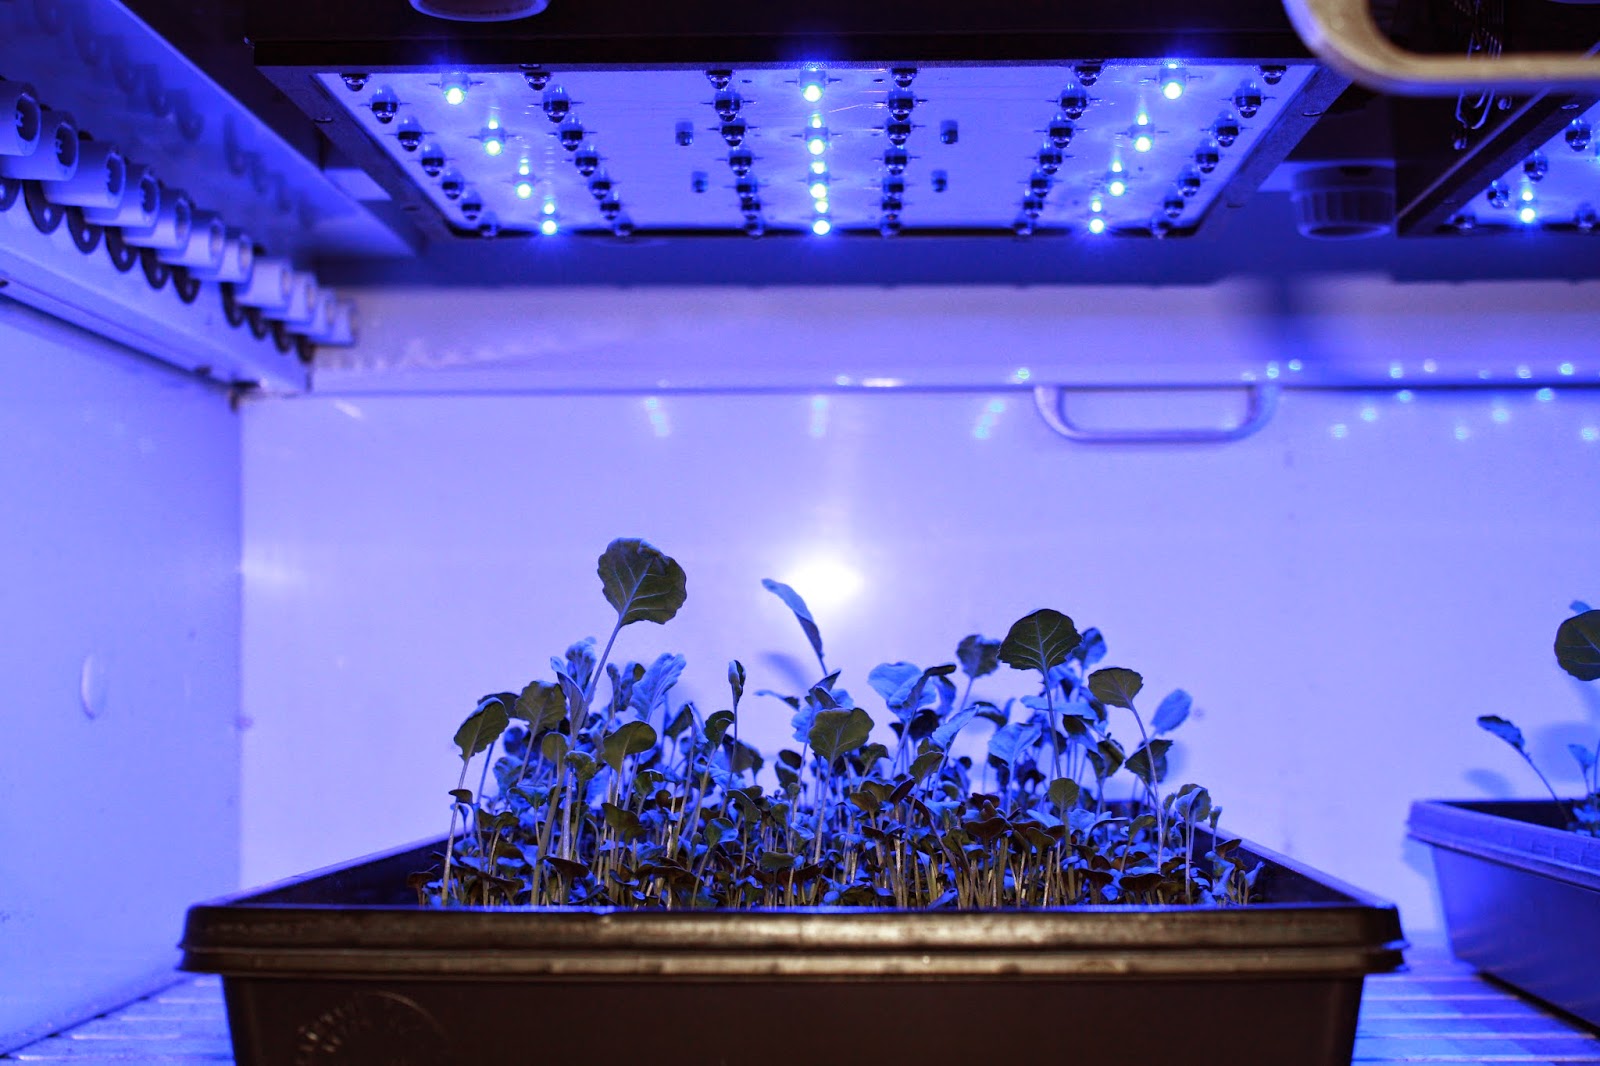 LEDs have the potential to change how crops are grown – Hort Americas